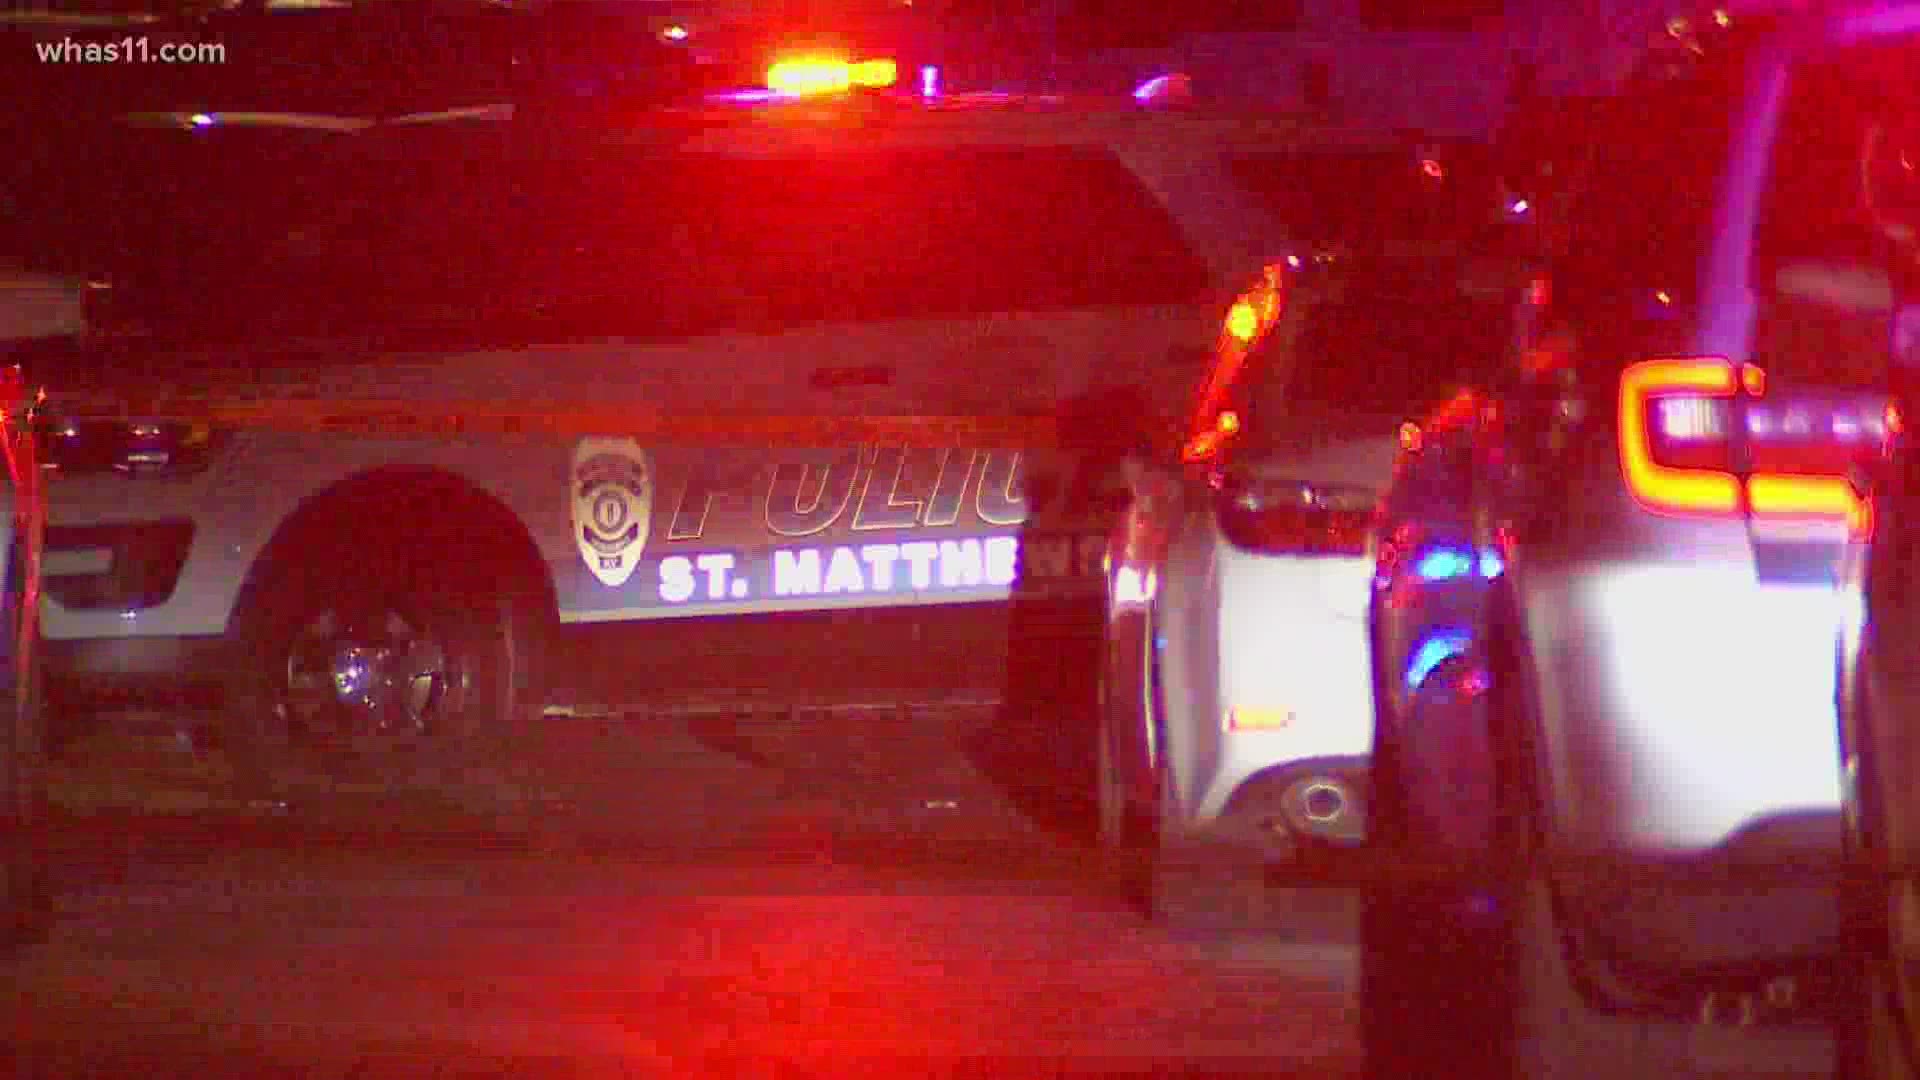 One person is dead and another is at the hospital after a shooting at St. Matthews apartment complex Sunday night.